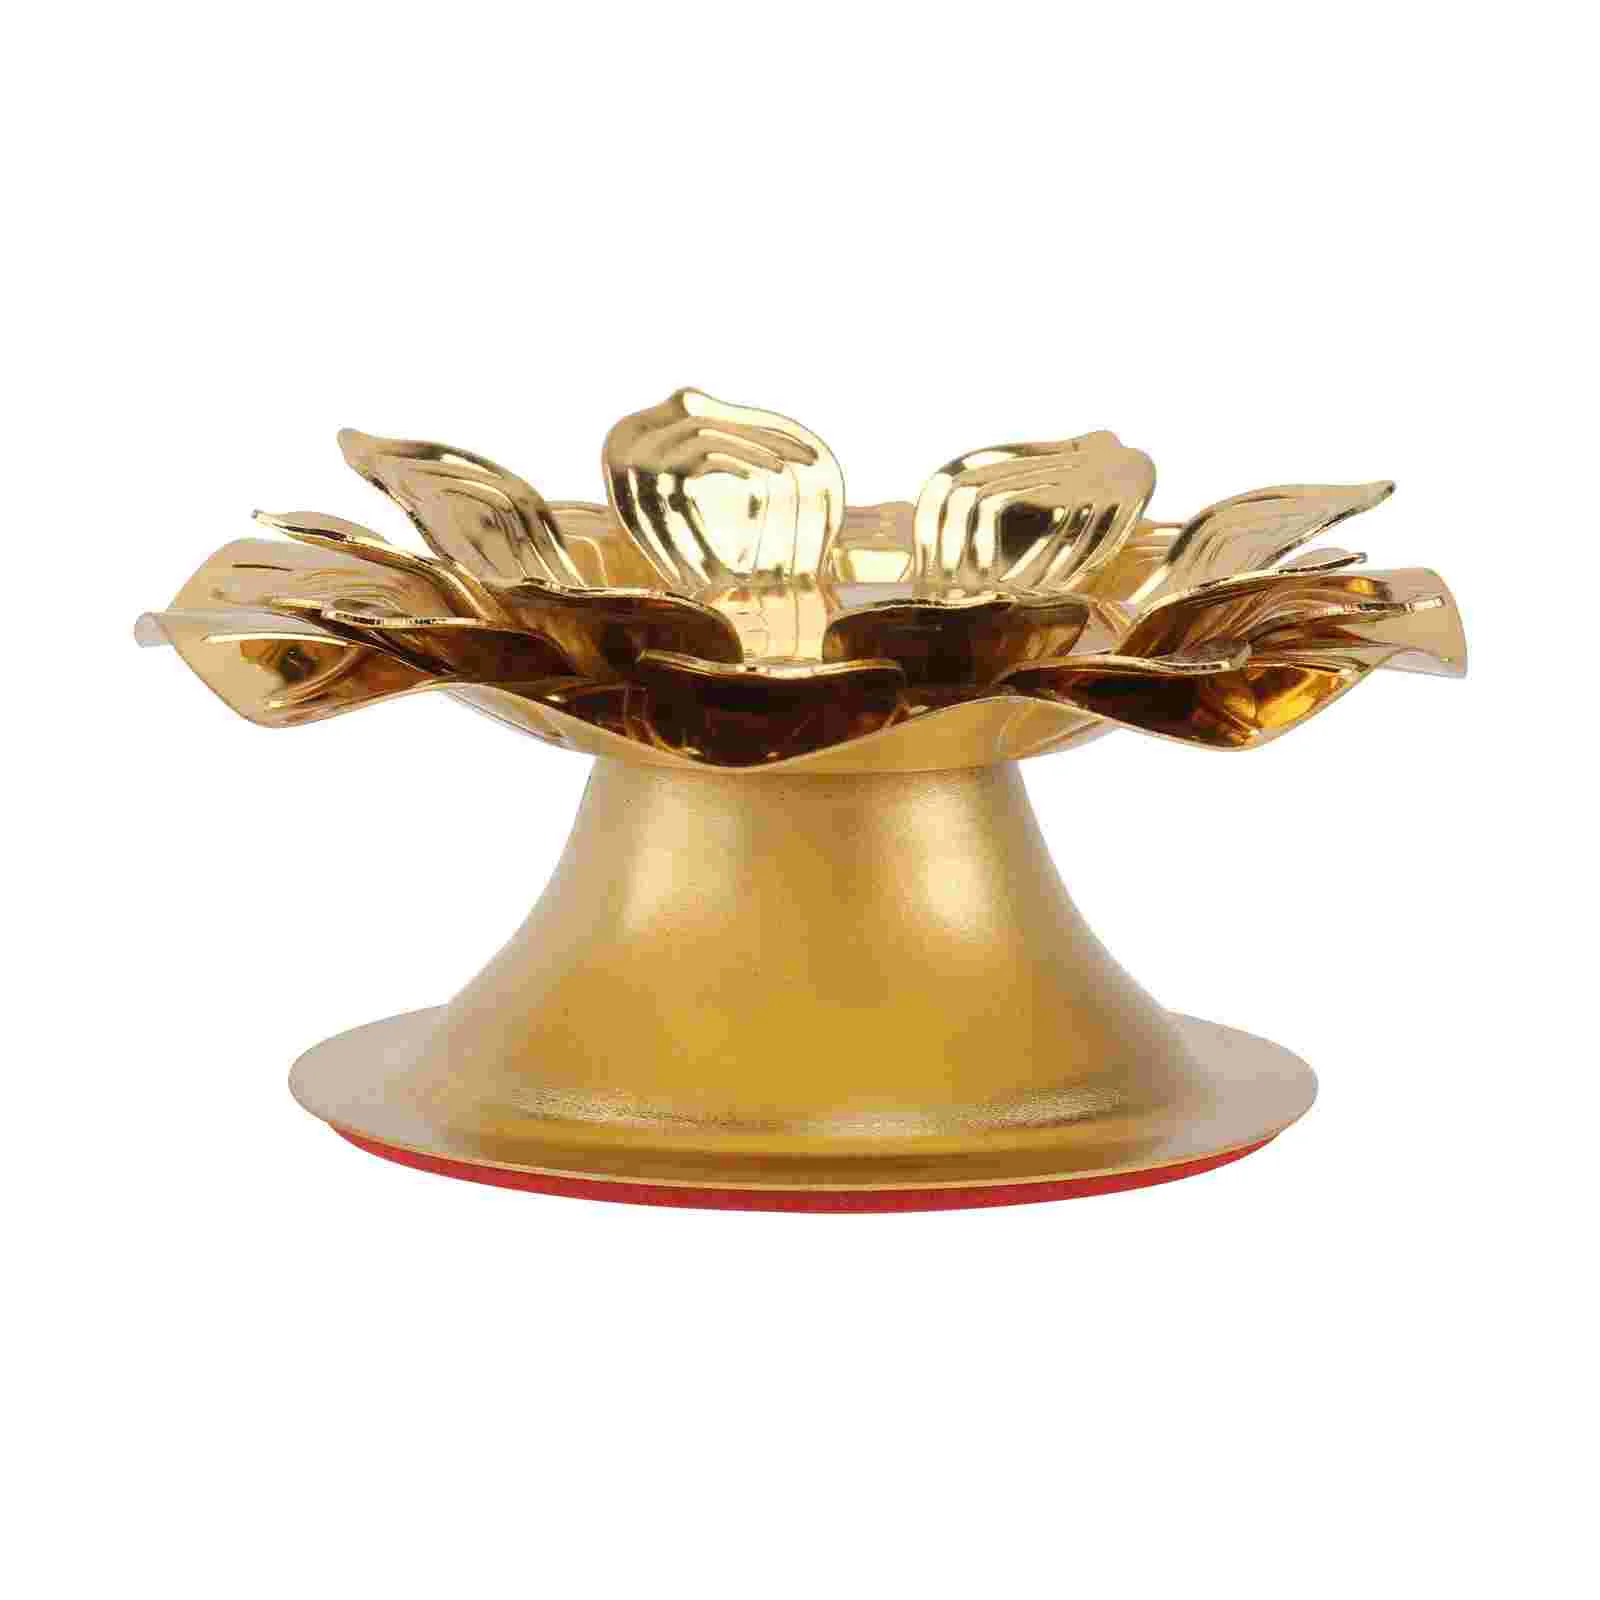 

1Pc Ritual Tool Candleholder Butter Lamp Holder for Temple Worship Ceremony